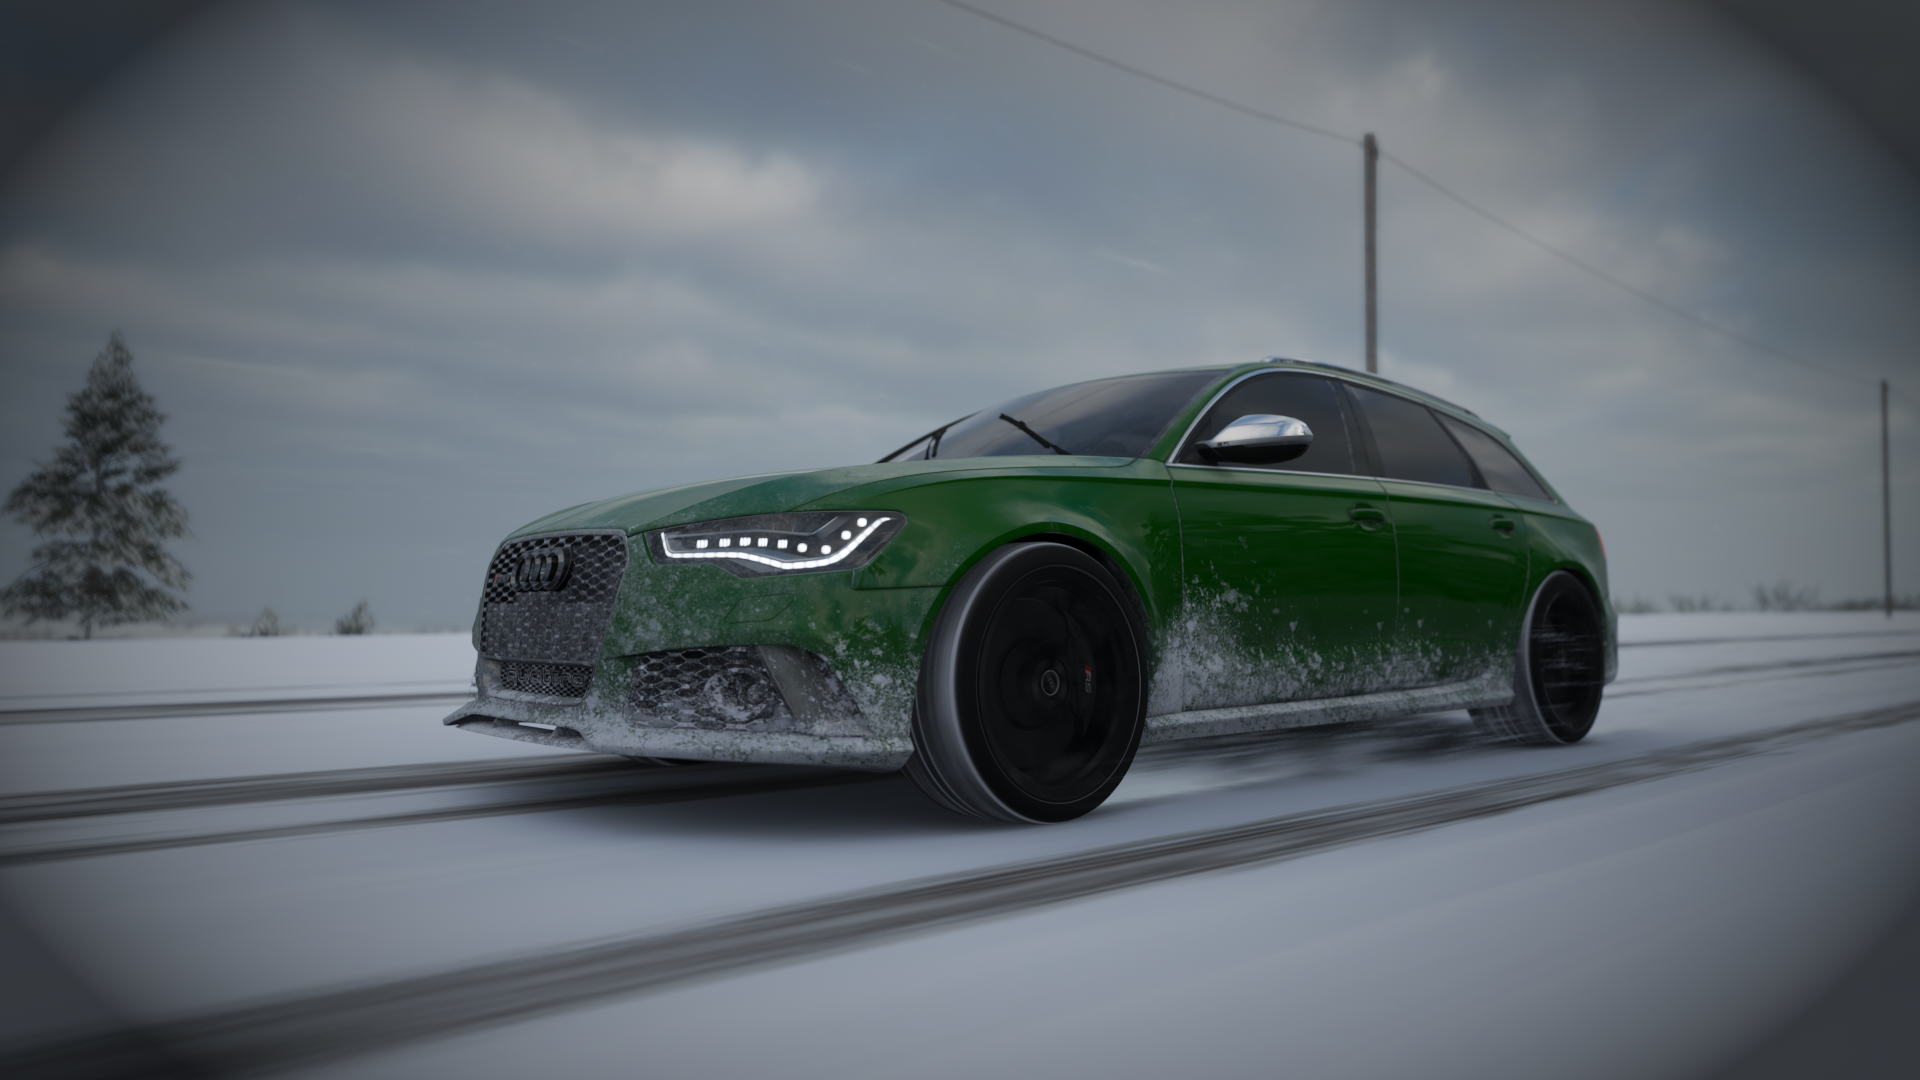 General 1920x1080 Audi snow Forza Horizon 4 car video game art screen shot video games vehicle frontal view headlights sky clouds driving snow covered road CGI Audi RS6 German cars station wagon Volkswagen Group PlaygroundGames